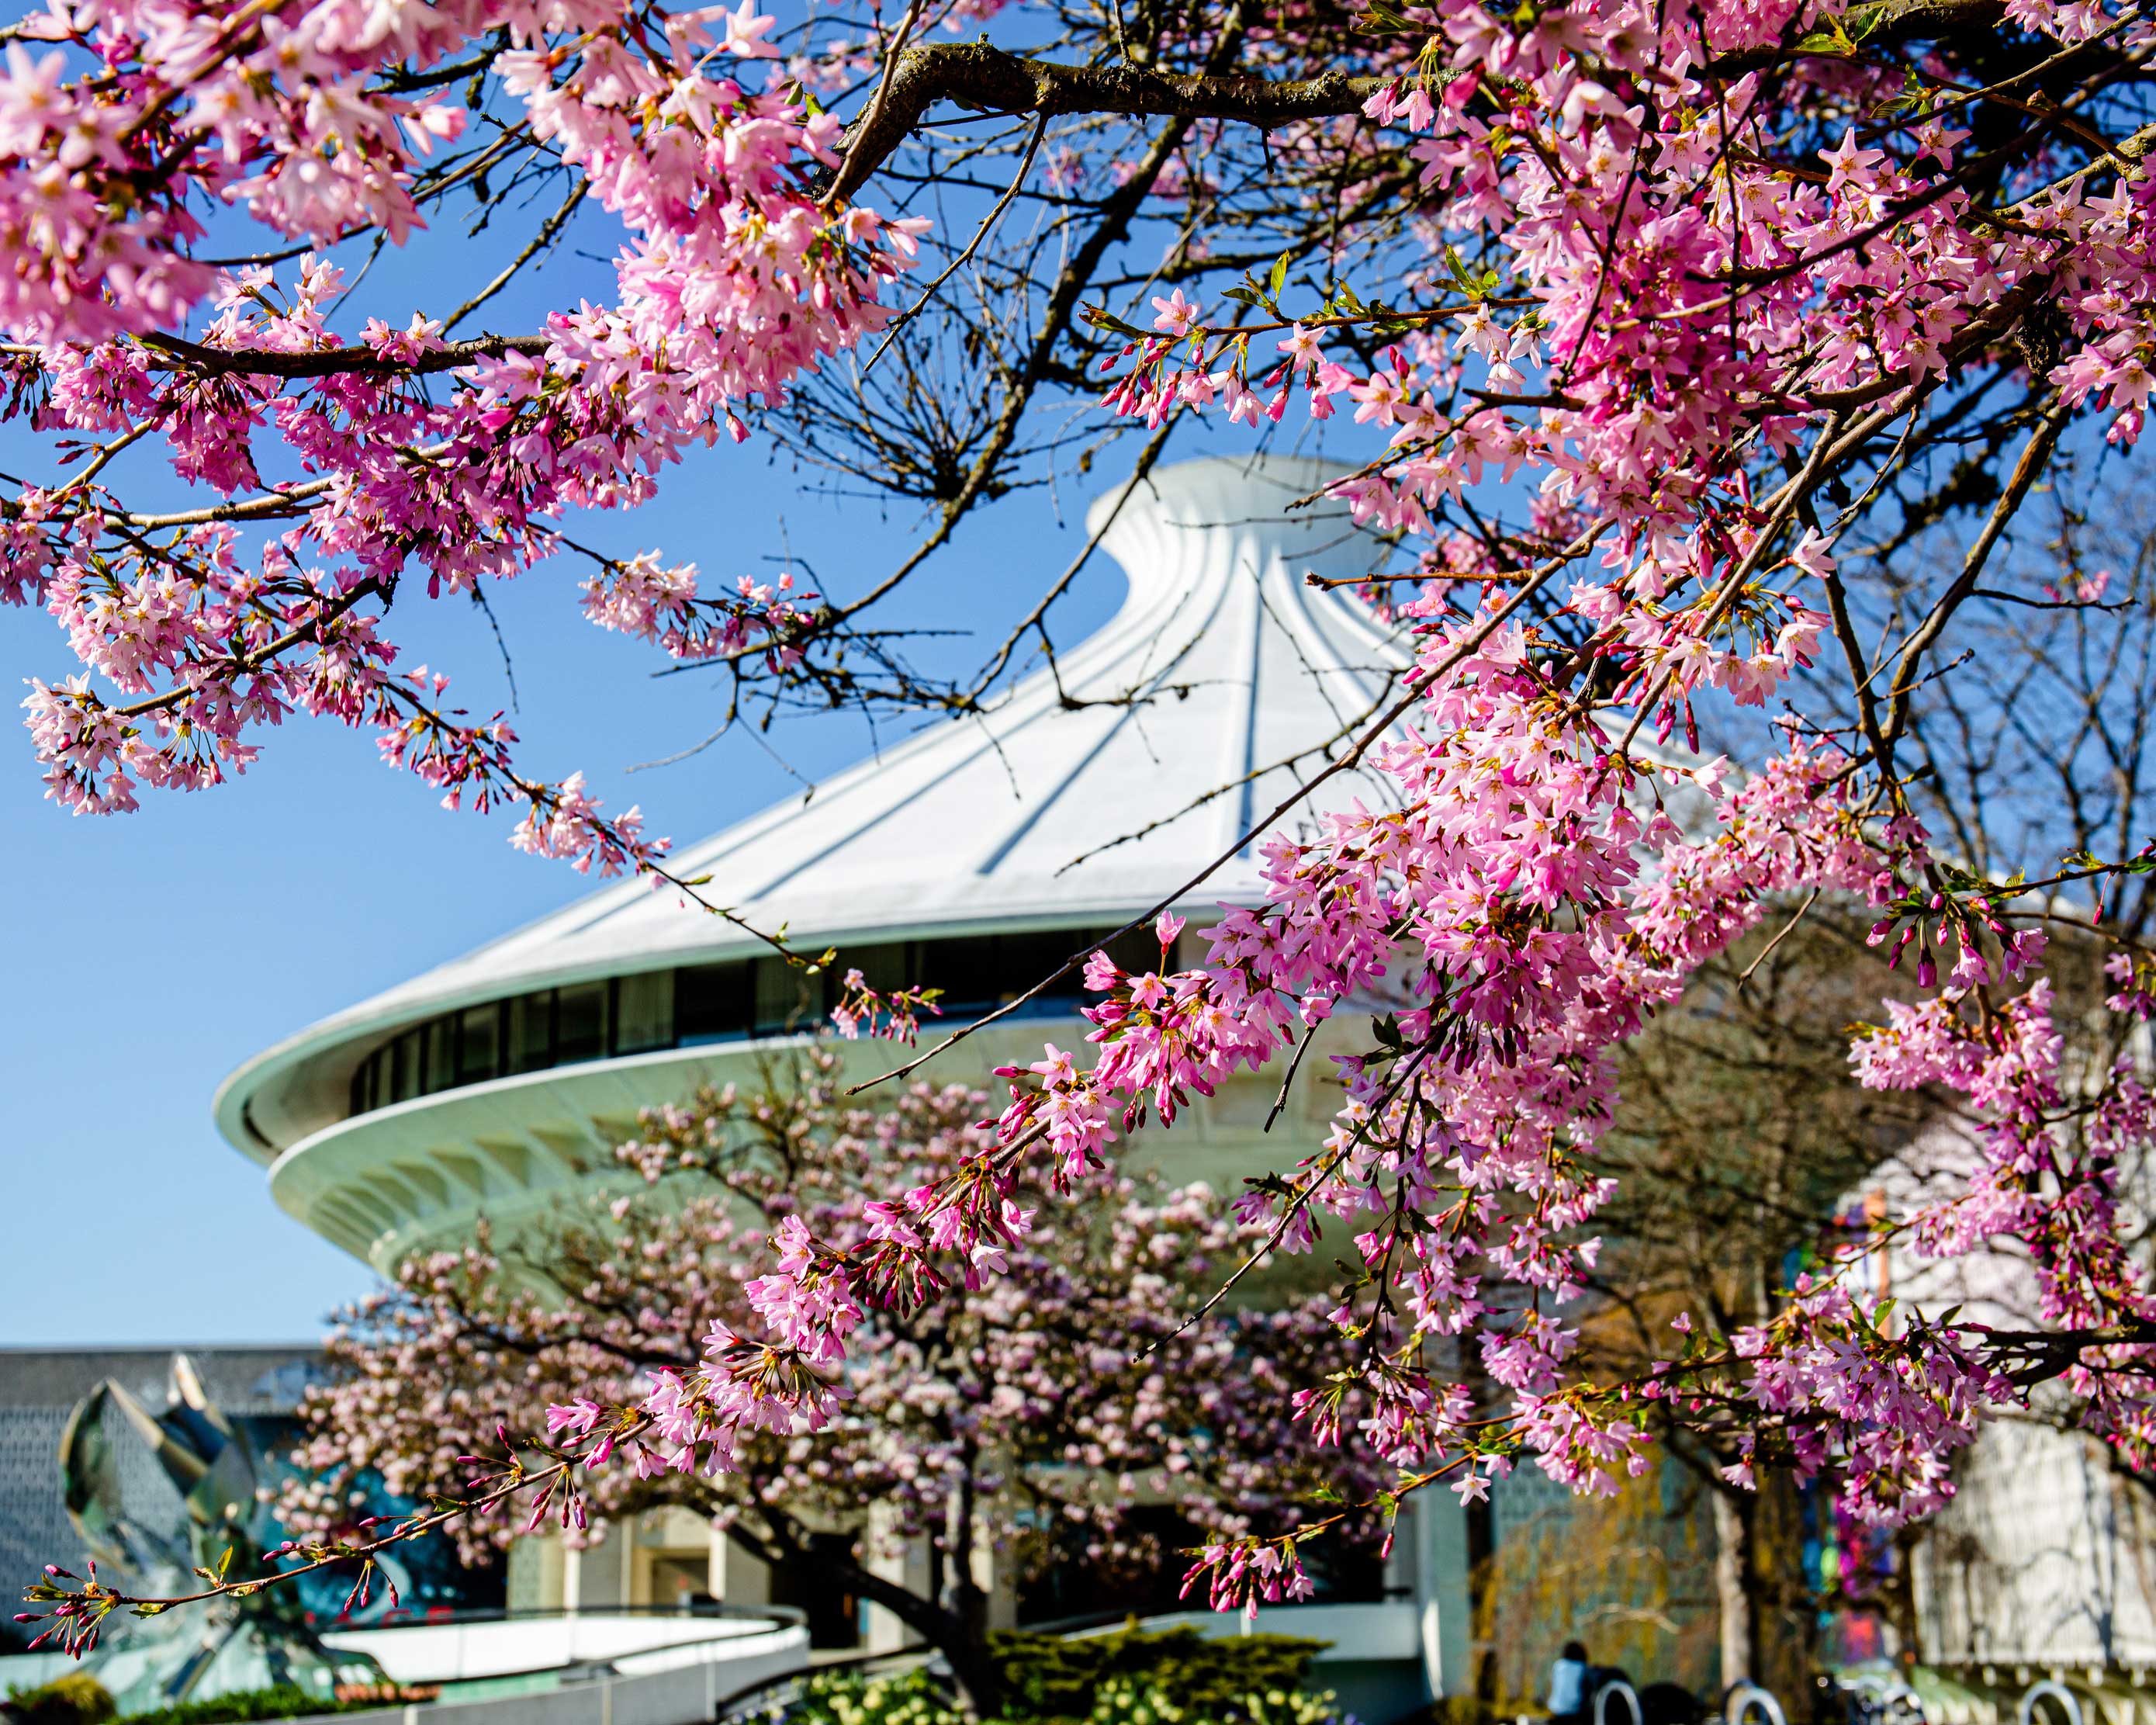 Vancouver vacations: space center with cherry blossom in the foreground.